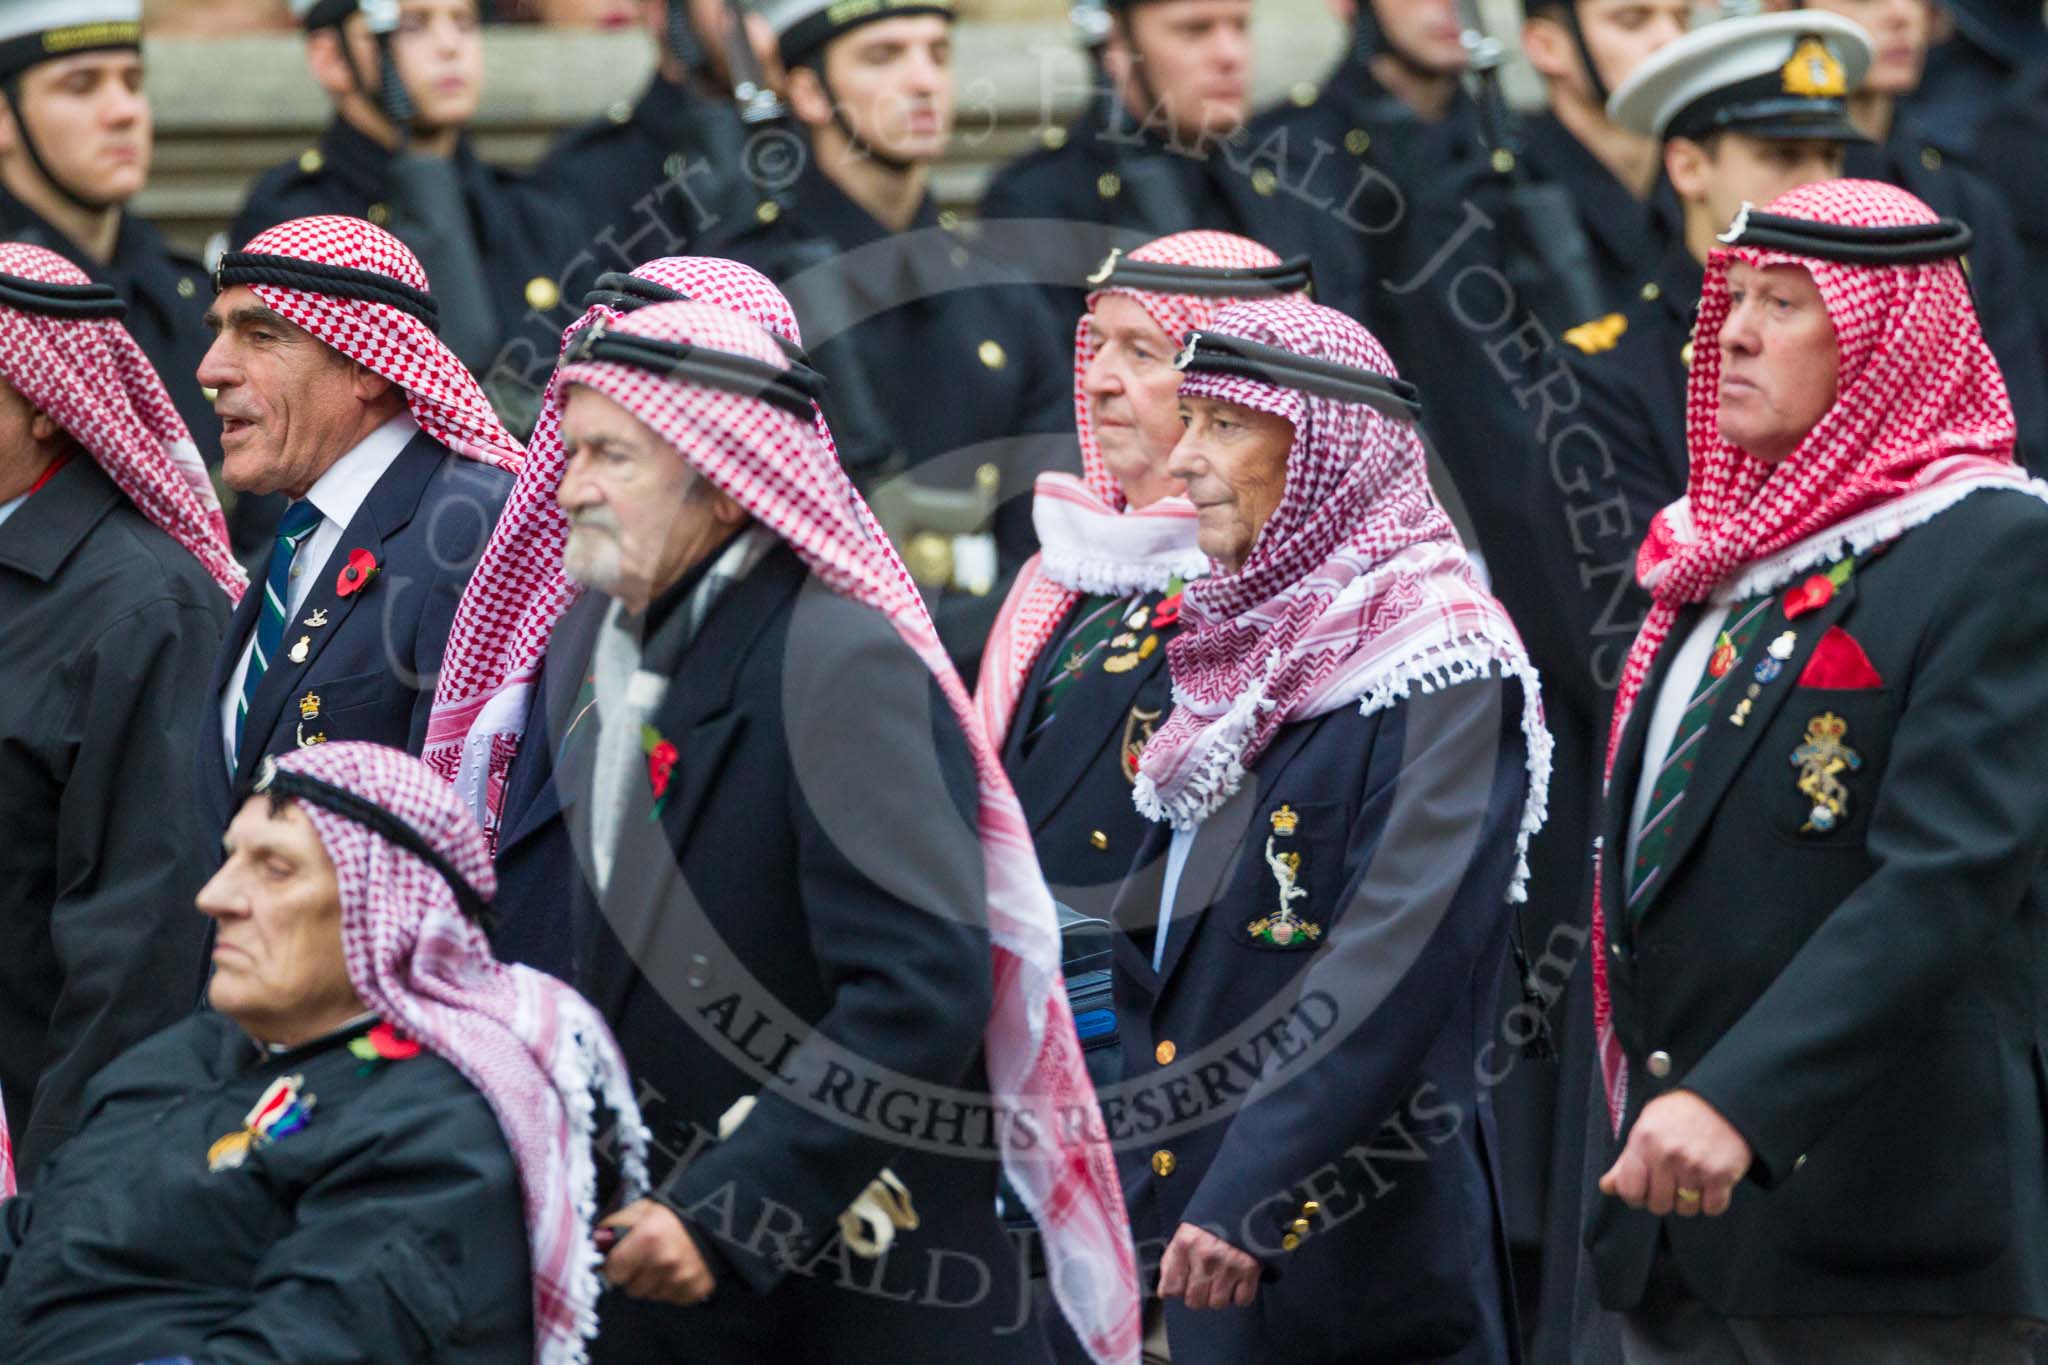 Remembrance Sunday at the Cenotaph 2015: Group D19, Trucial Oman Scouts Association.
Cenotaph, Whitehall, London SW1,
London,
Greater London,
United Kingdom,
on 08 November 2015 at 11:55, image #705